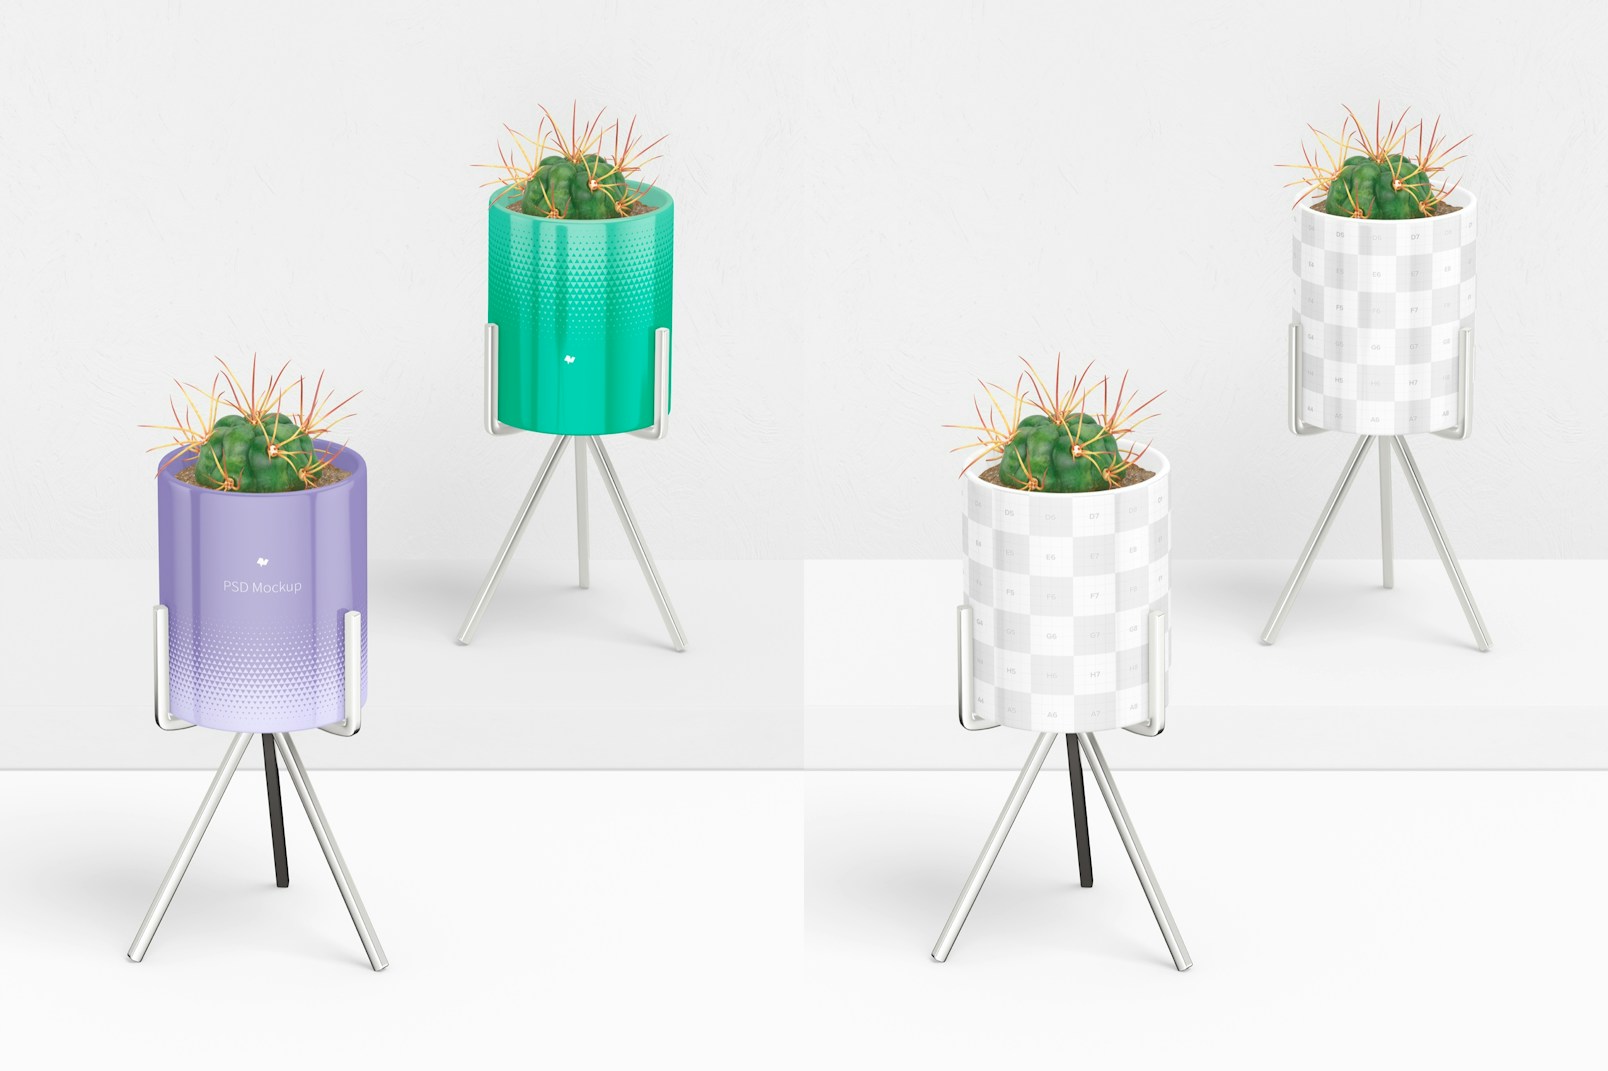 Flower Pots with Metal Stand Mockup, Perspective